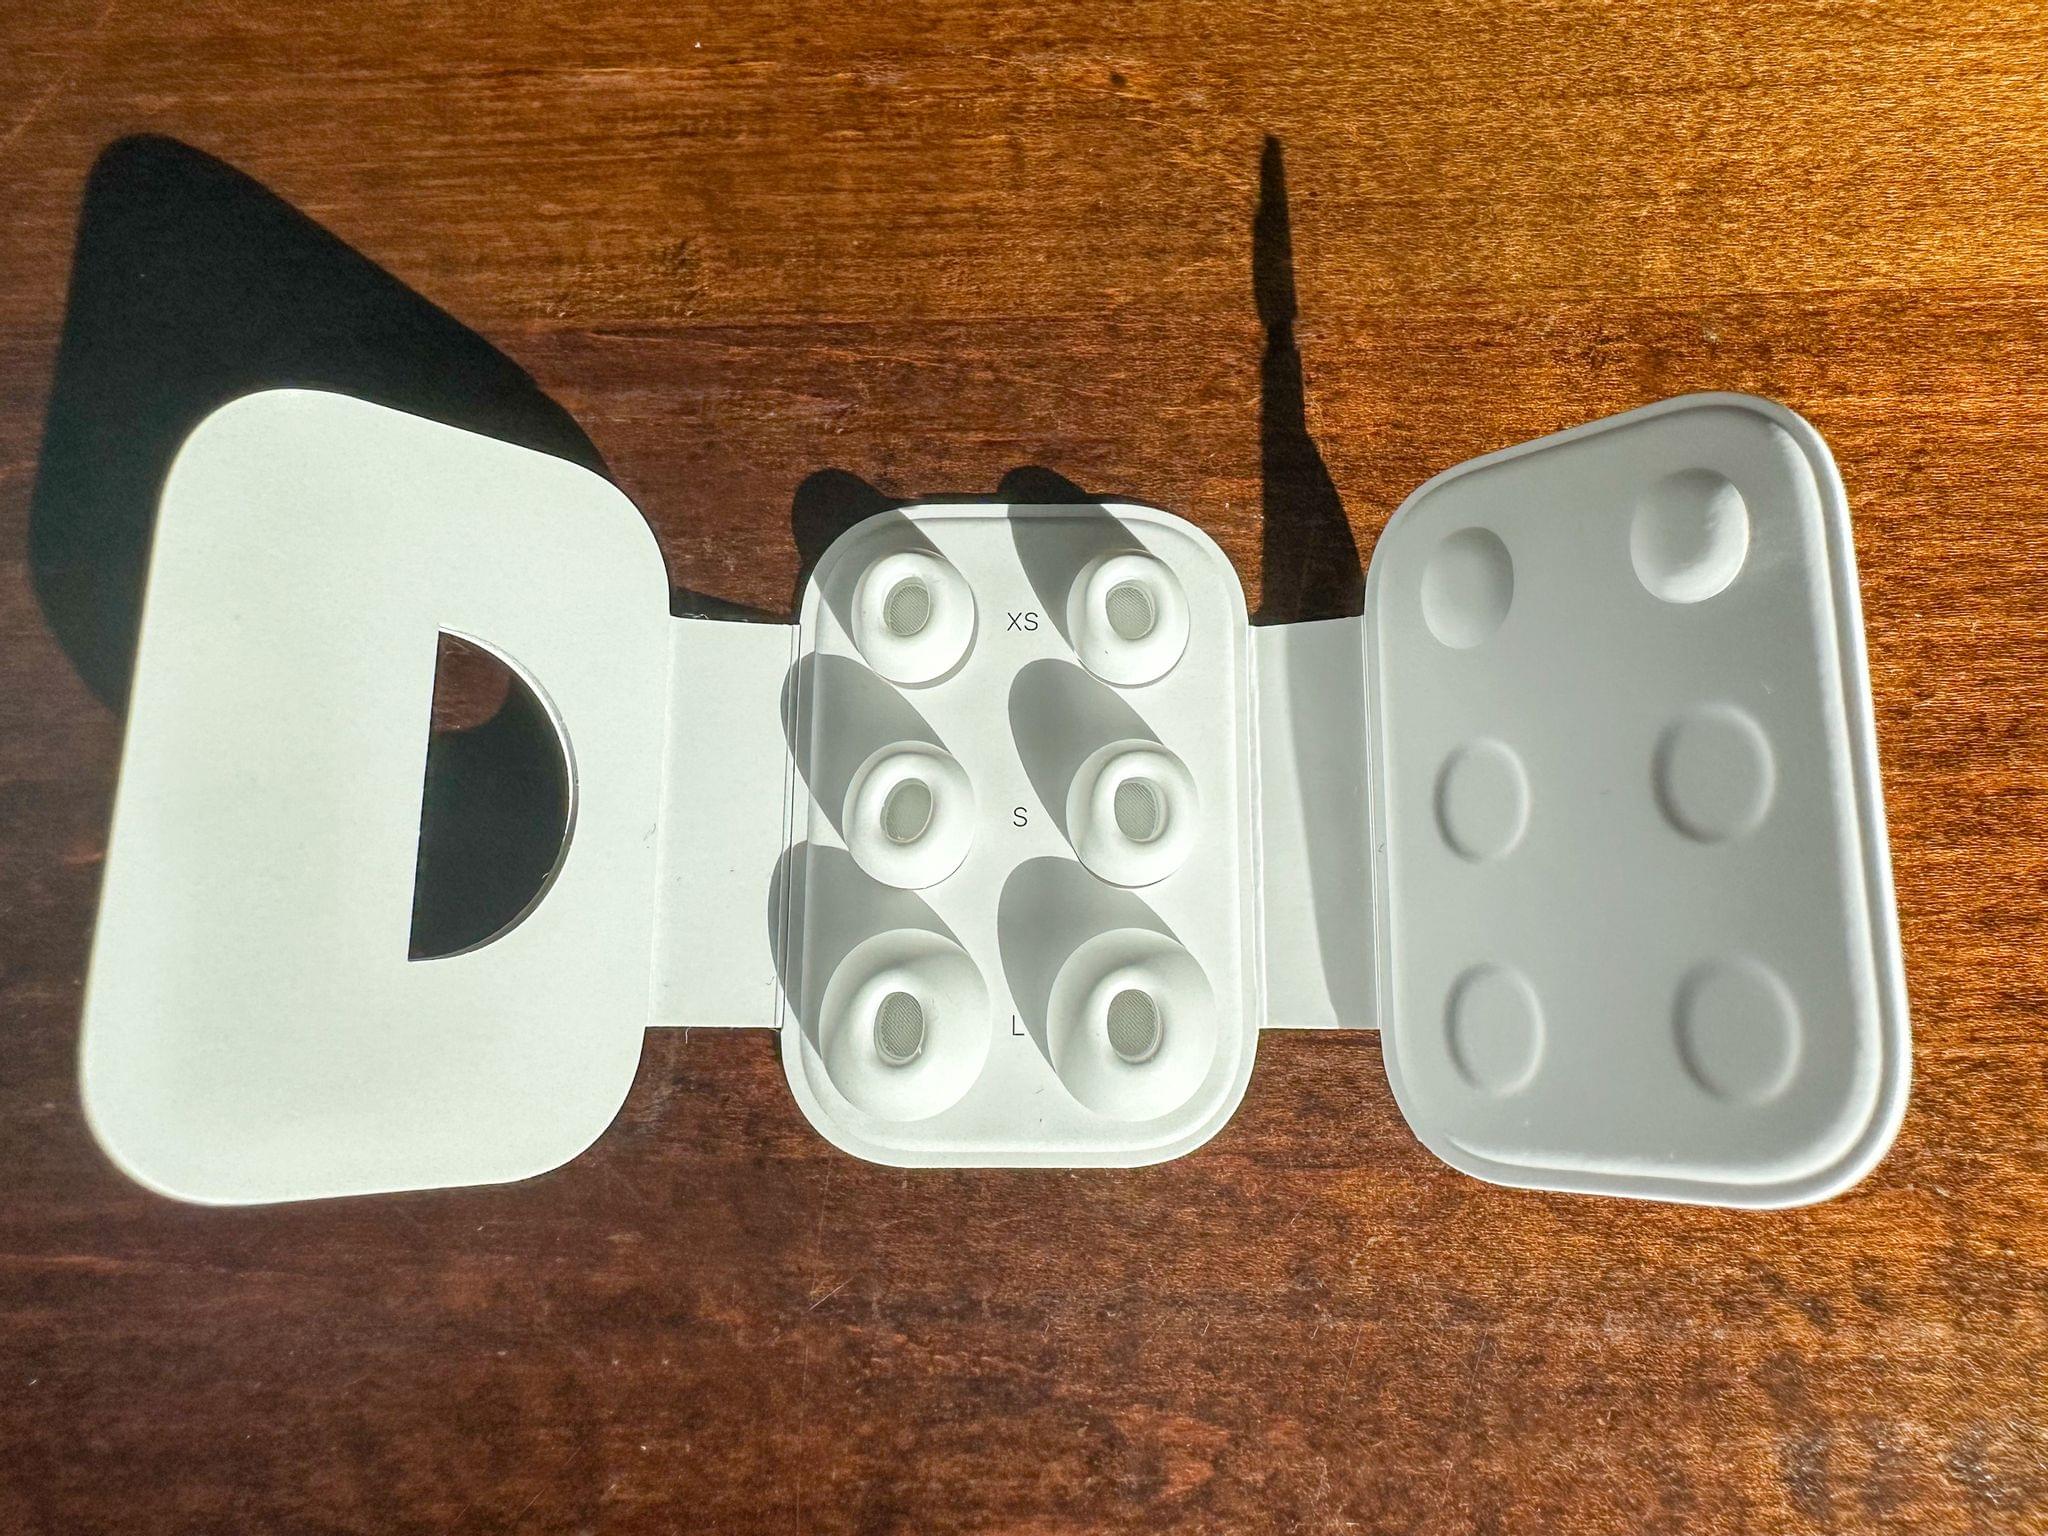 The AirPods Pro tips come with an extra-small option now.